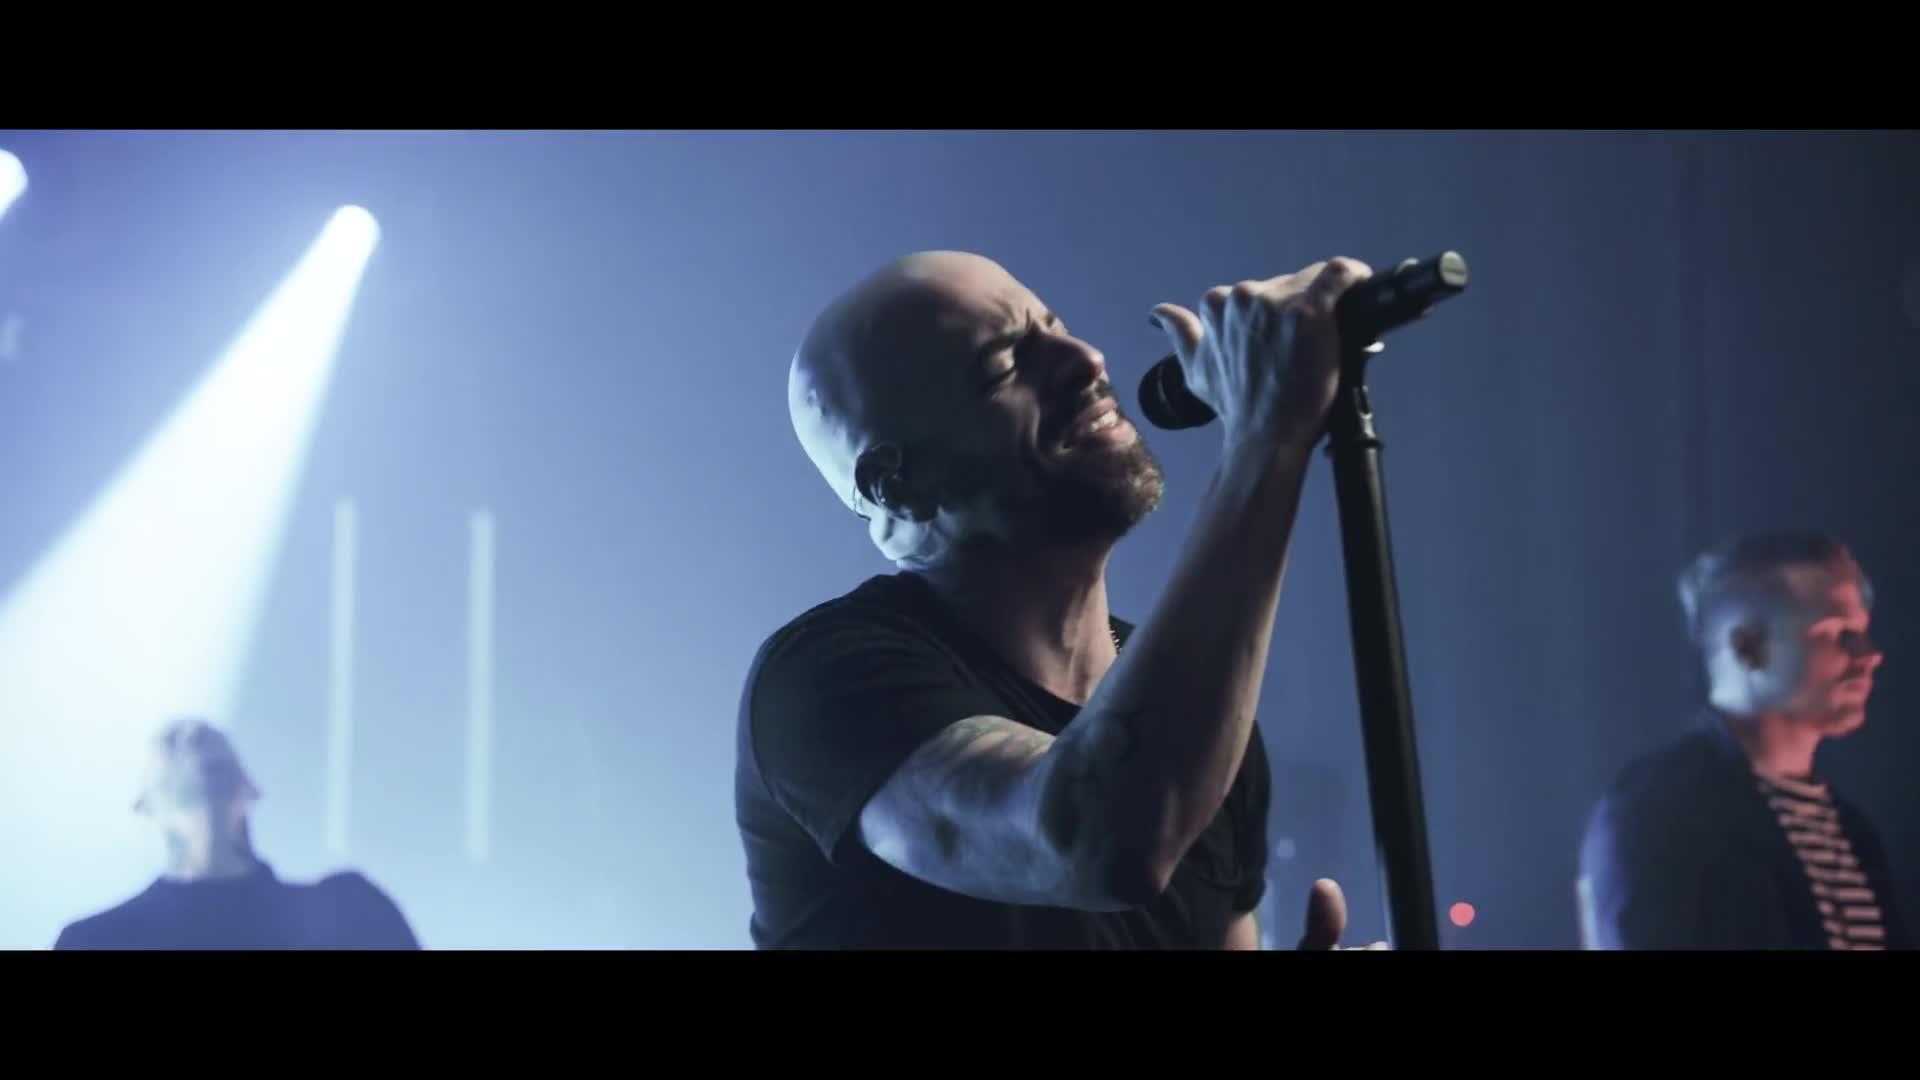 Daughtry - Alive